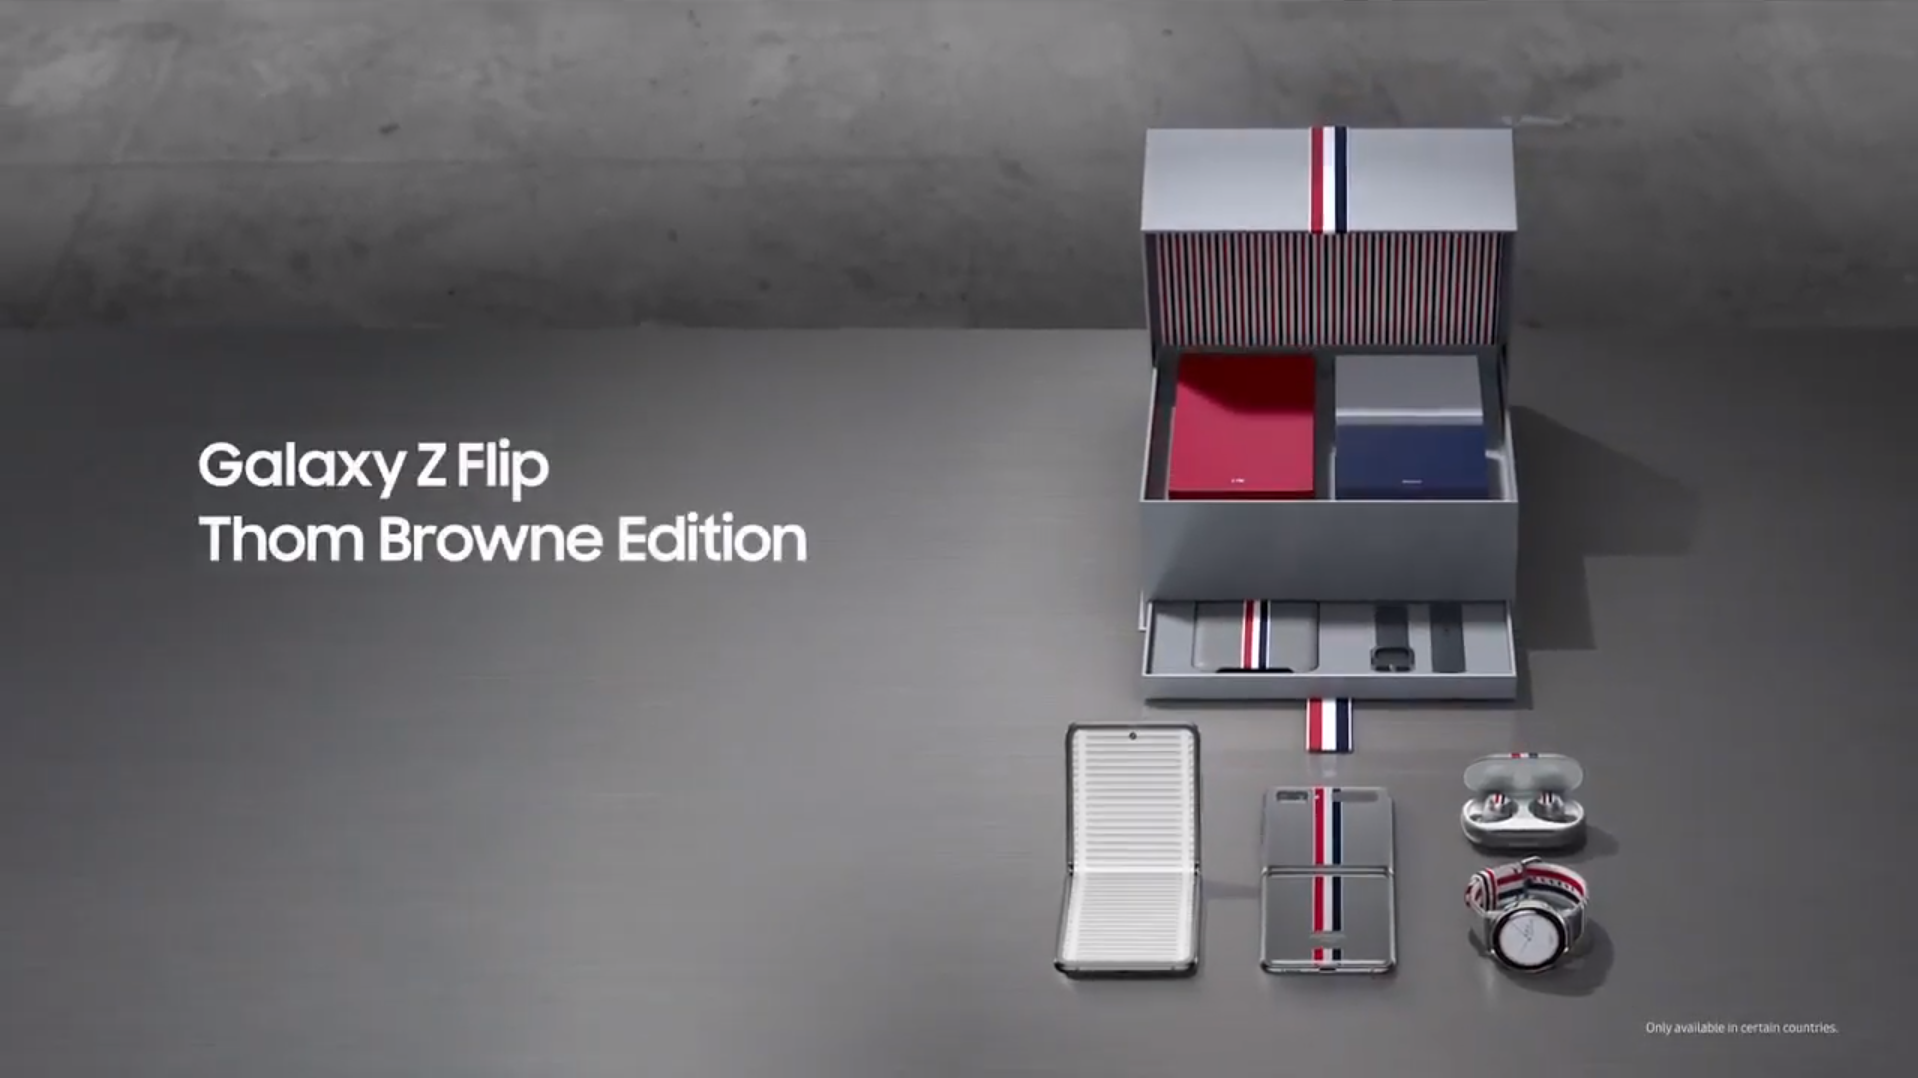 Samsung Galaxy Z Flip Thom Browne Edition package & design exposed